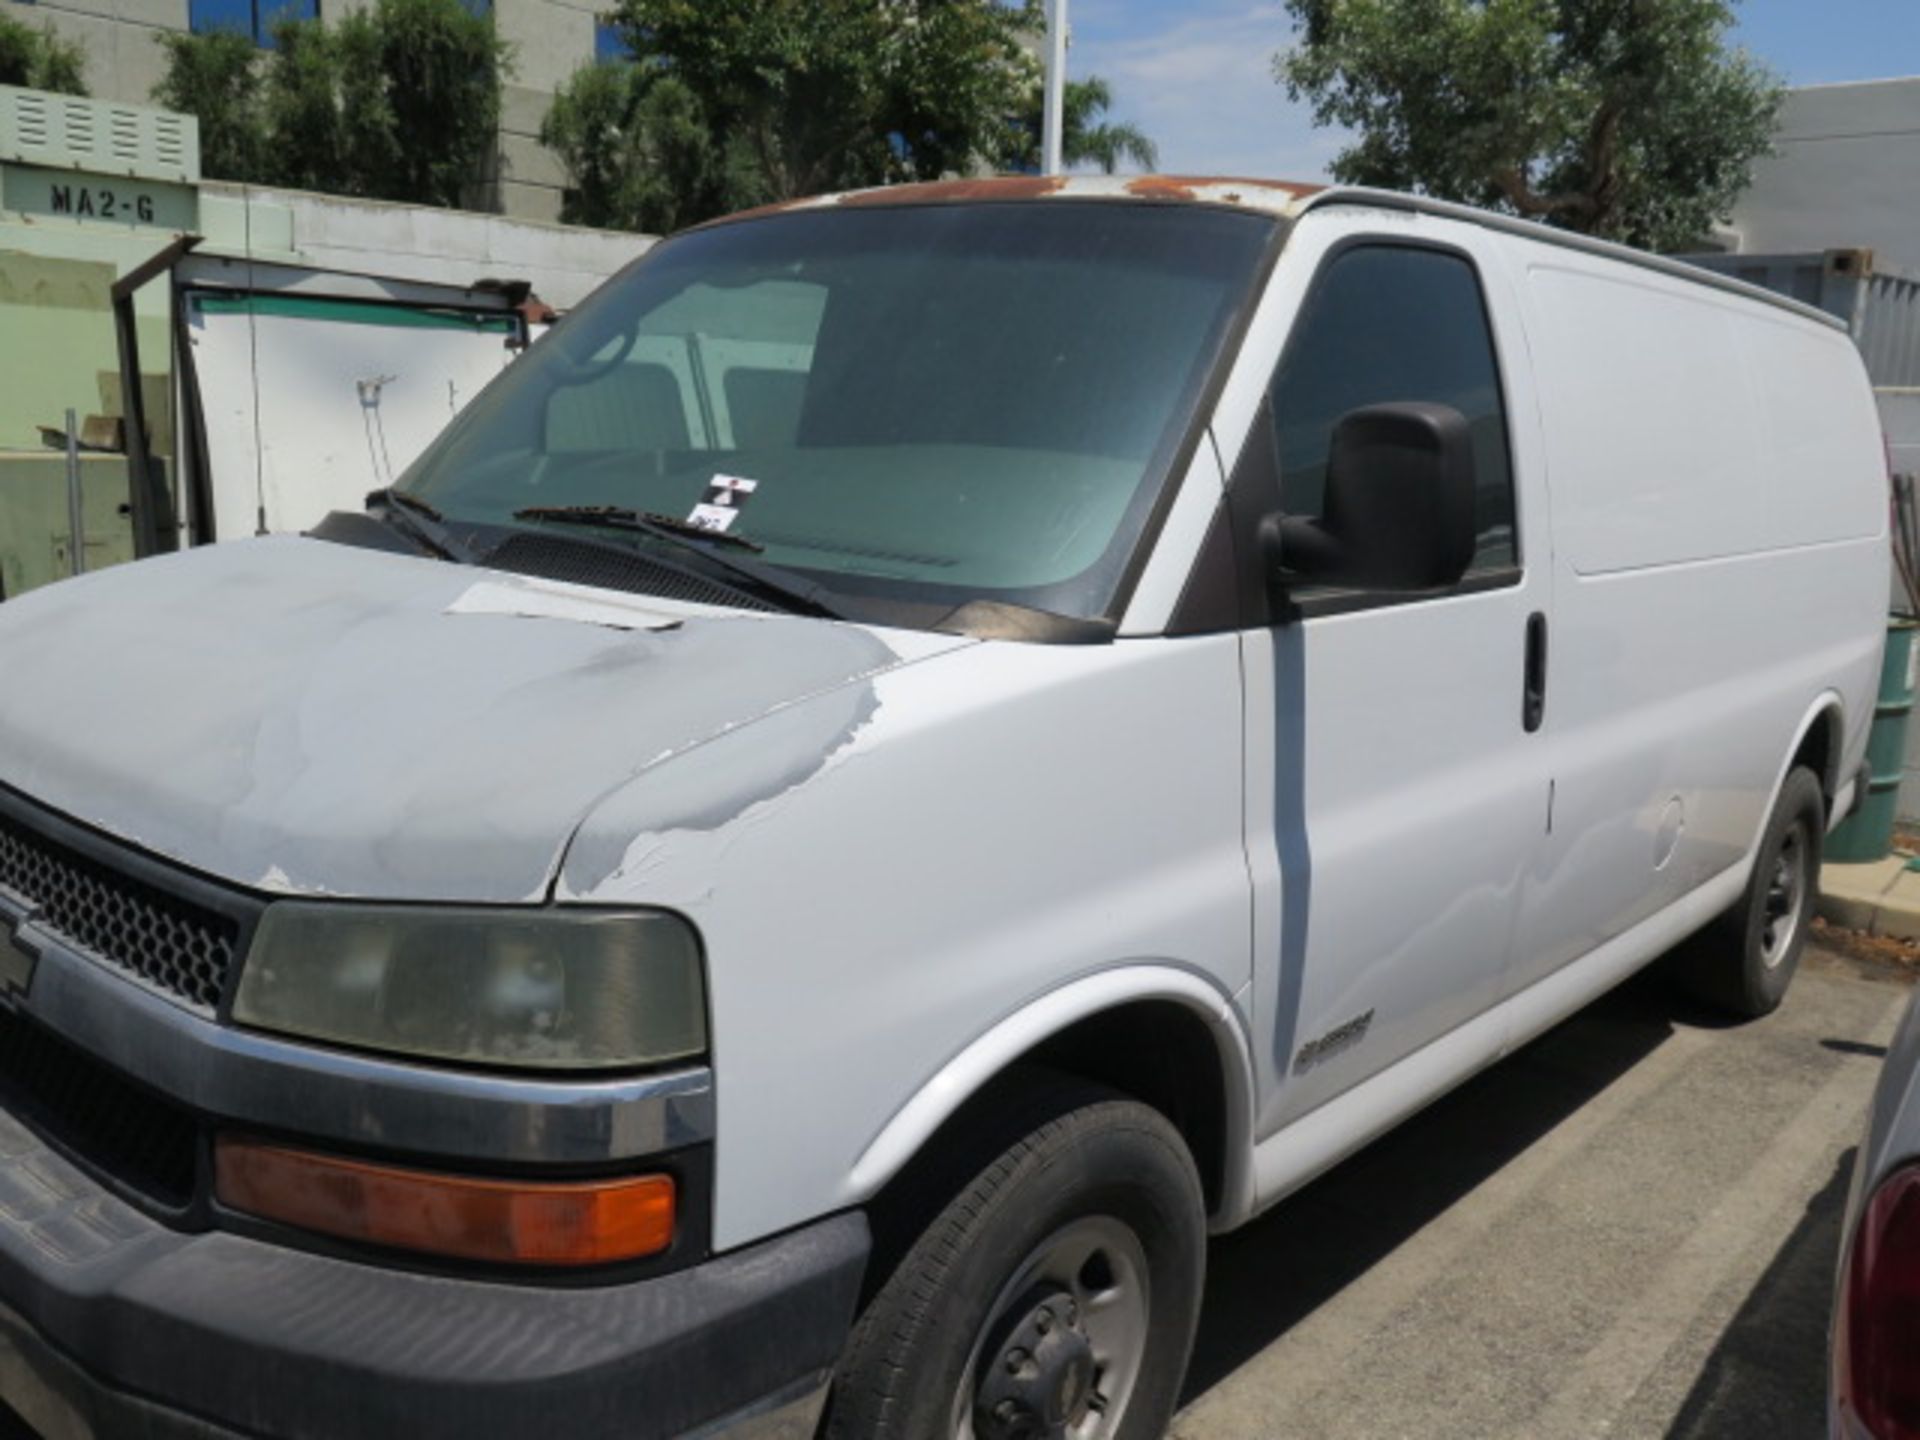 2006 Chevrolet 2500 Express Carbo Van (NEEDS NEW ENGINE) Lisc# 7X59077 w/ Auto Trans, SOLD AS IS